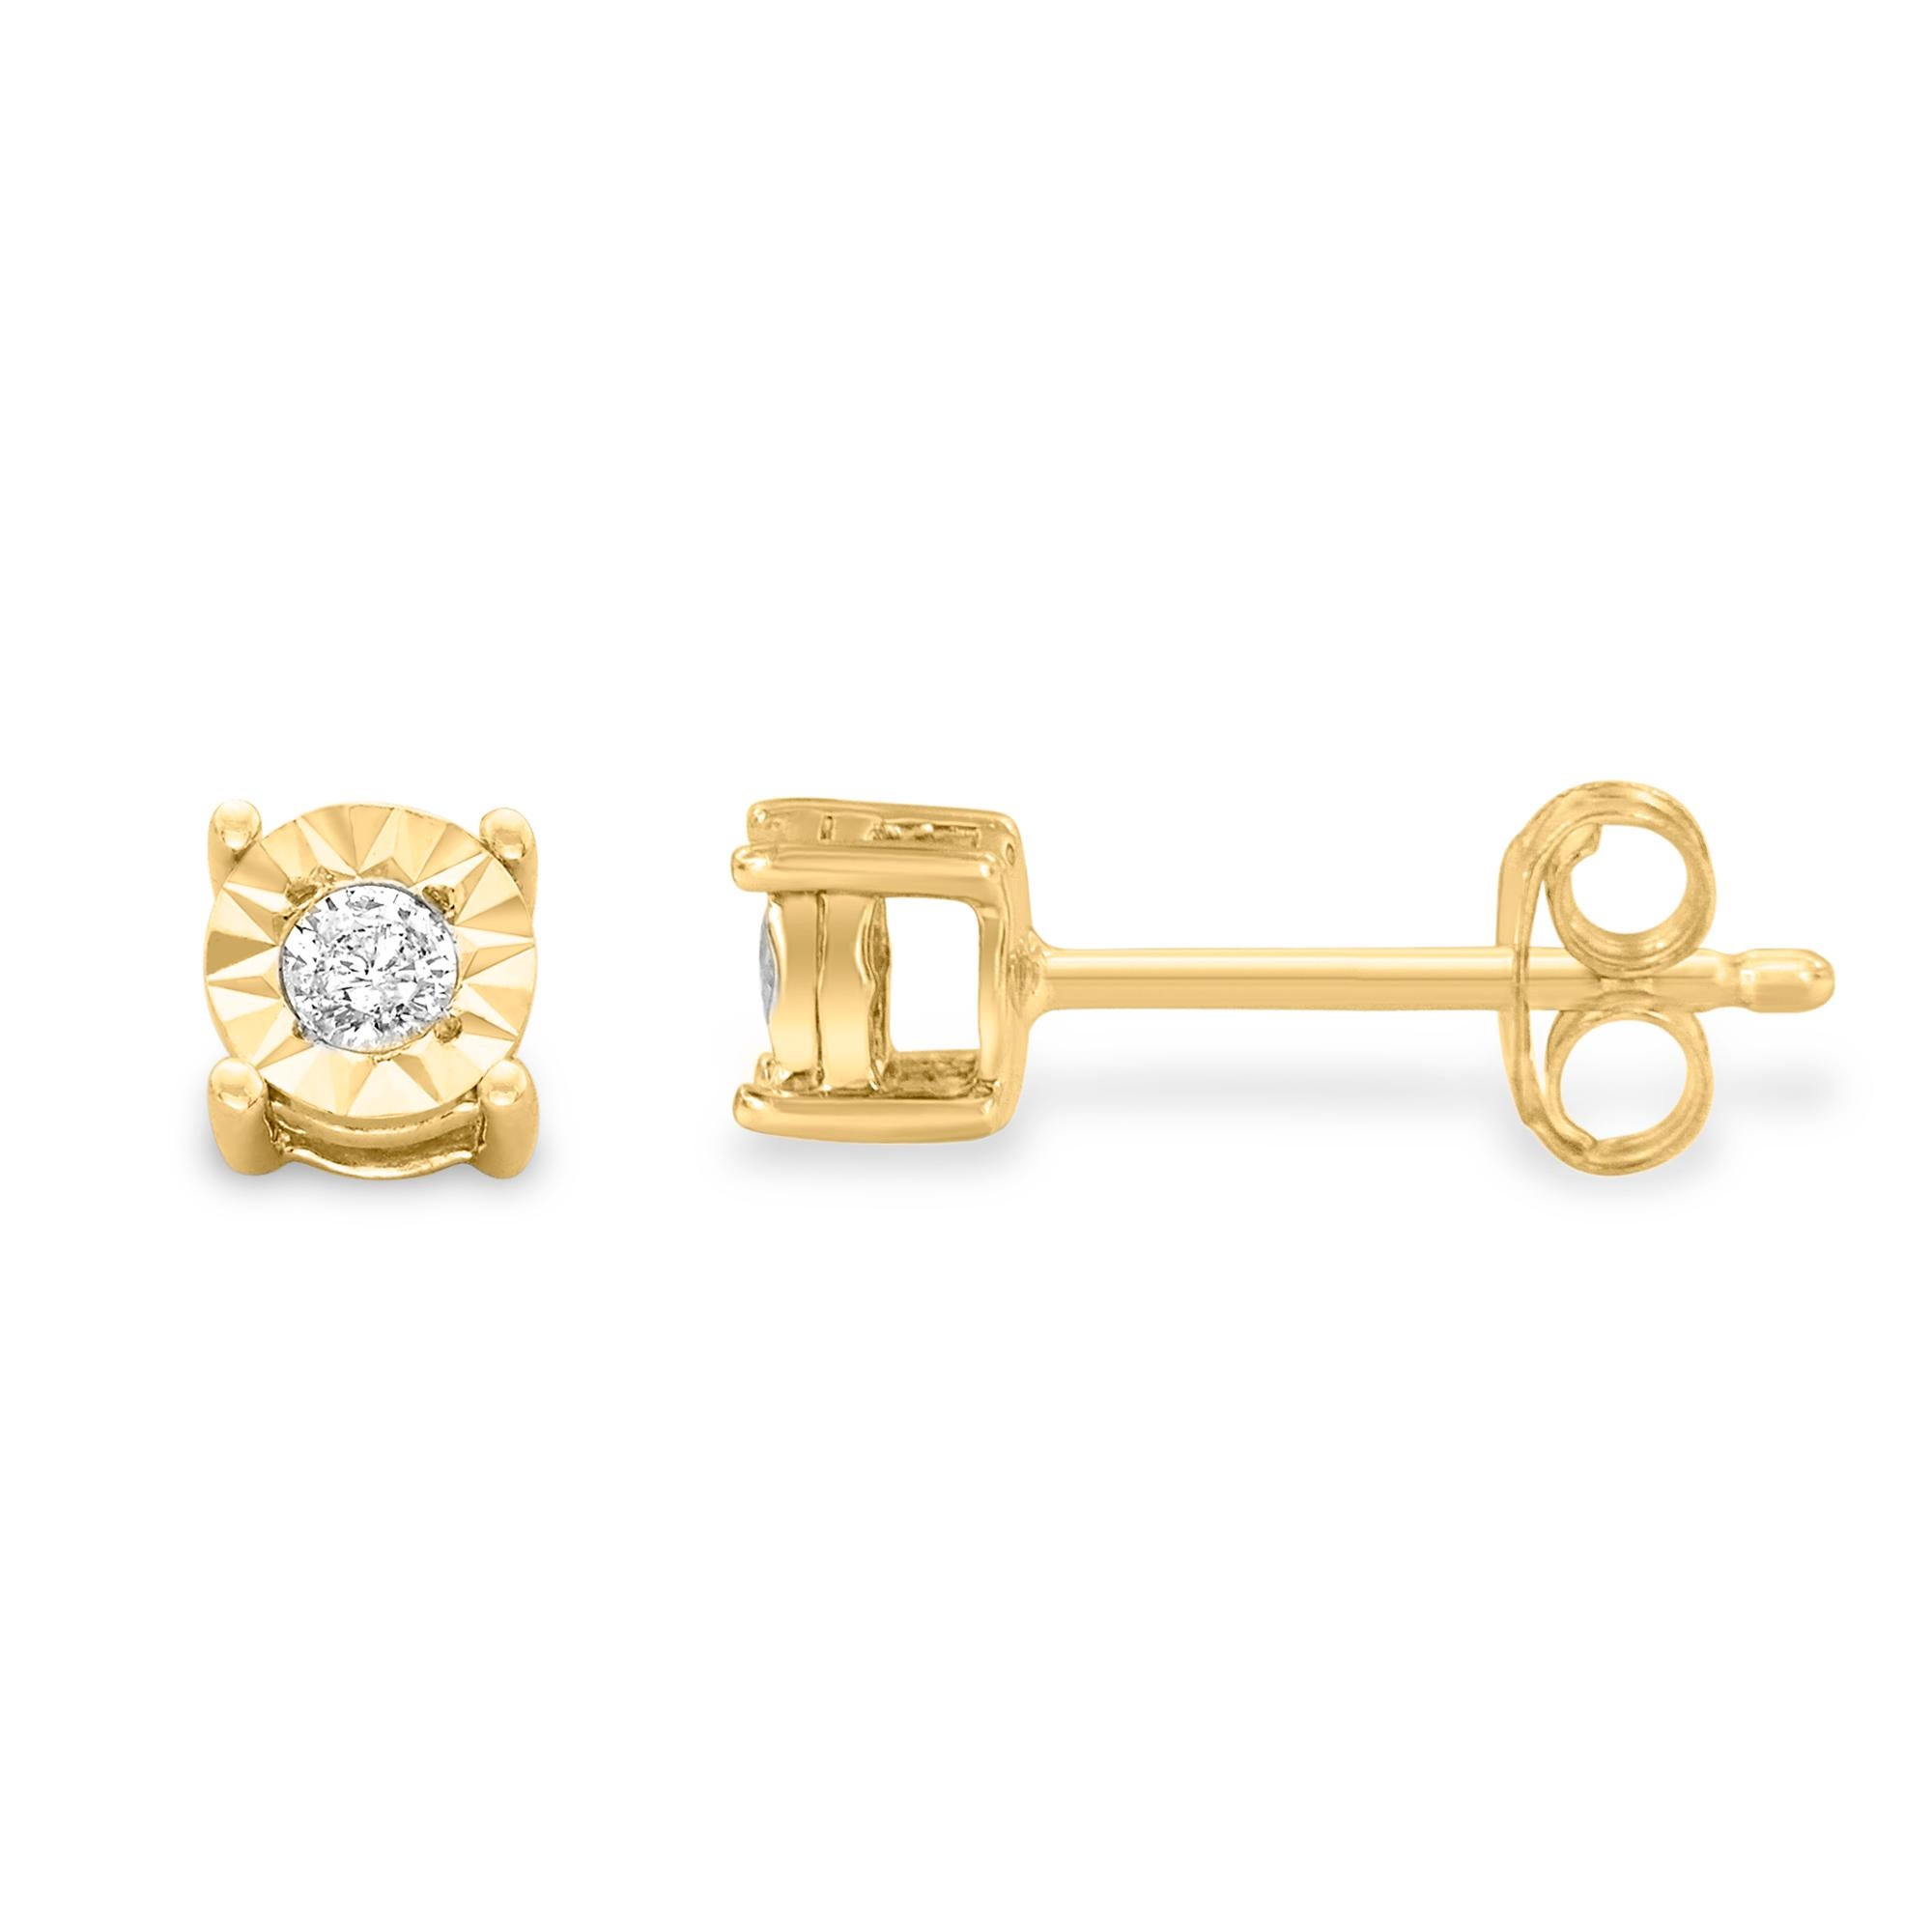 Add a shimmering touch to your wardrobe with these elegant and extravagant diamond earrings. Fashioned in the round shape, the earrings are crafted of sterling silver and have a yellow gold plating of 10 karats. Each of the studs captivates